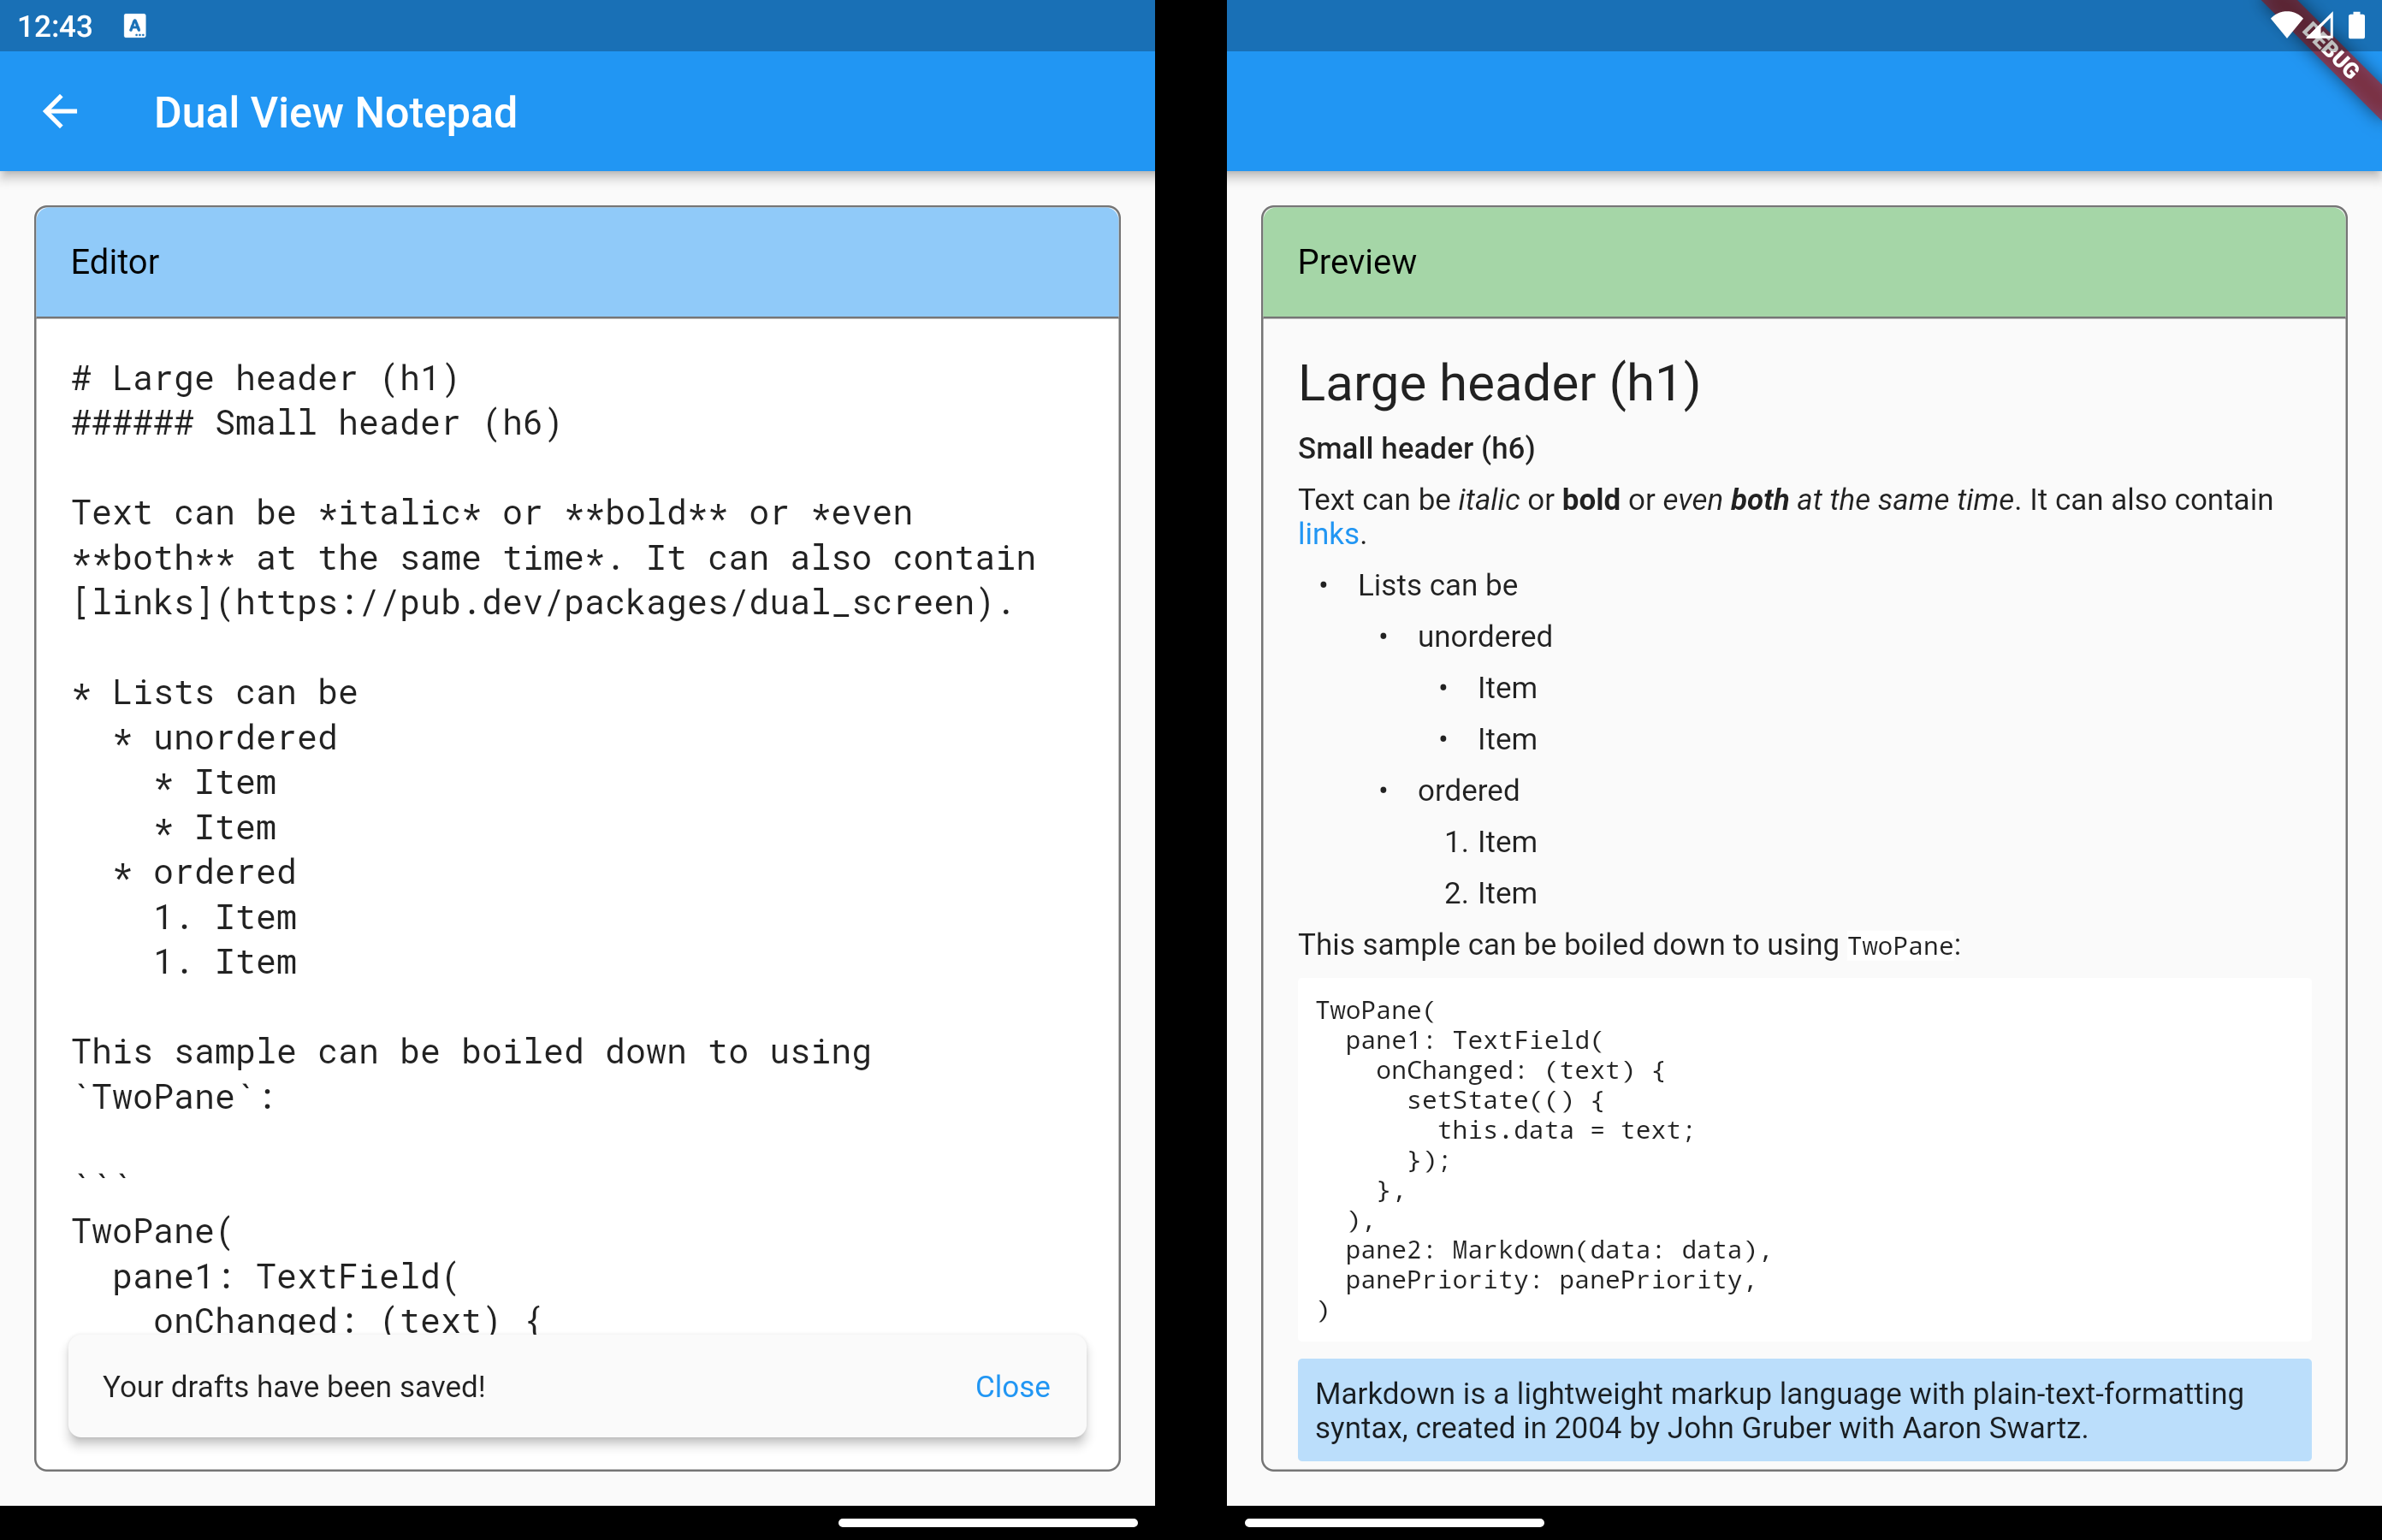 Flutter Dual View Notepad sample in dual-screen mode